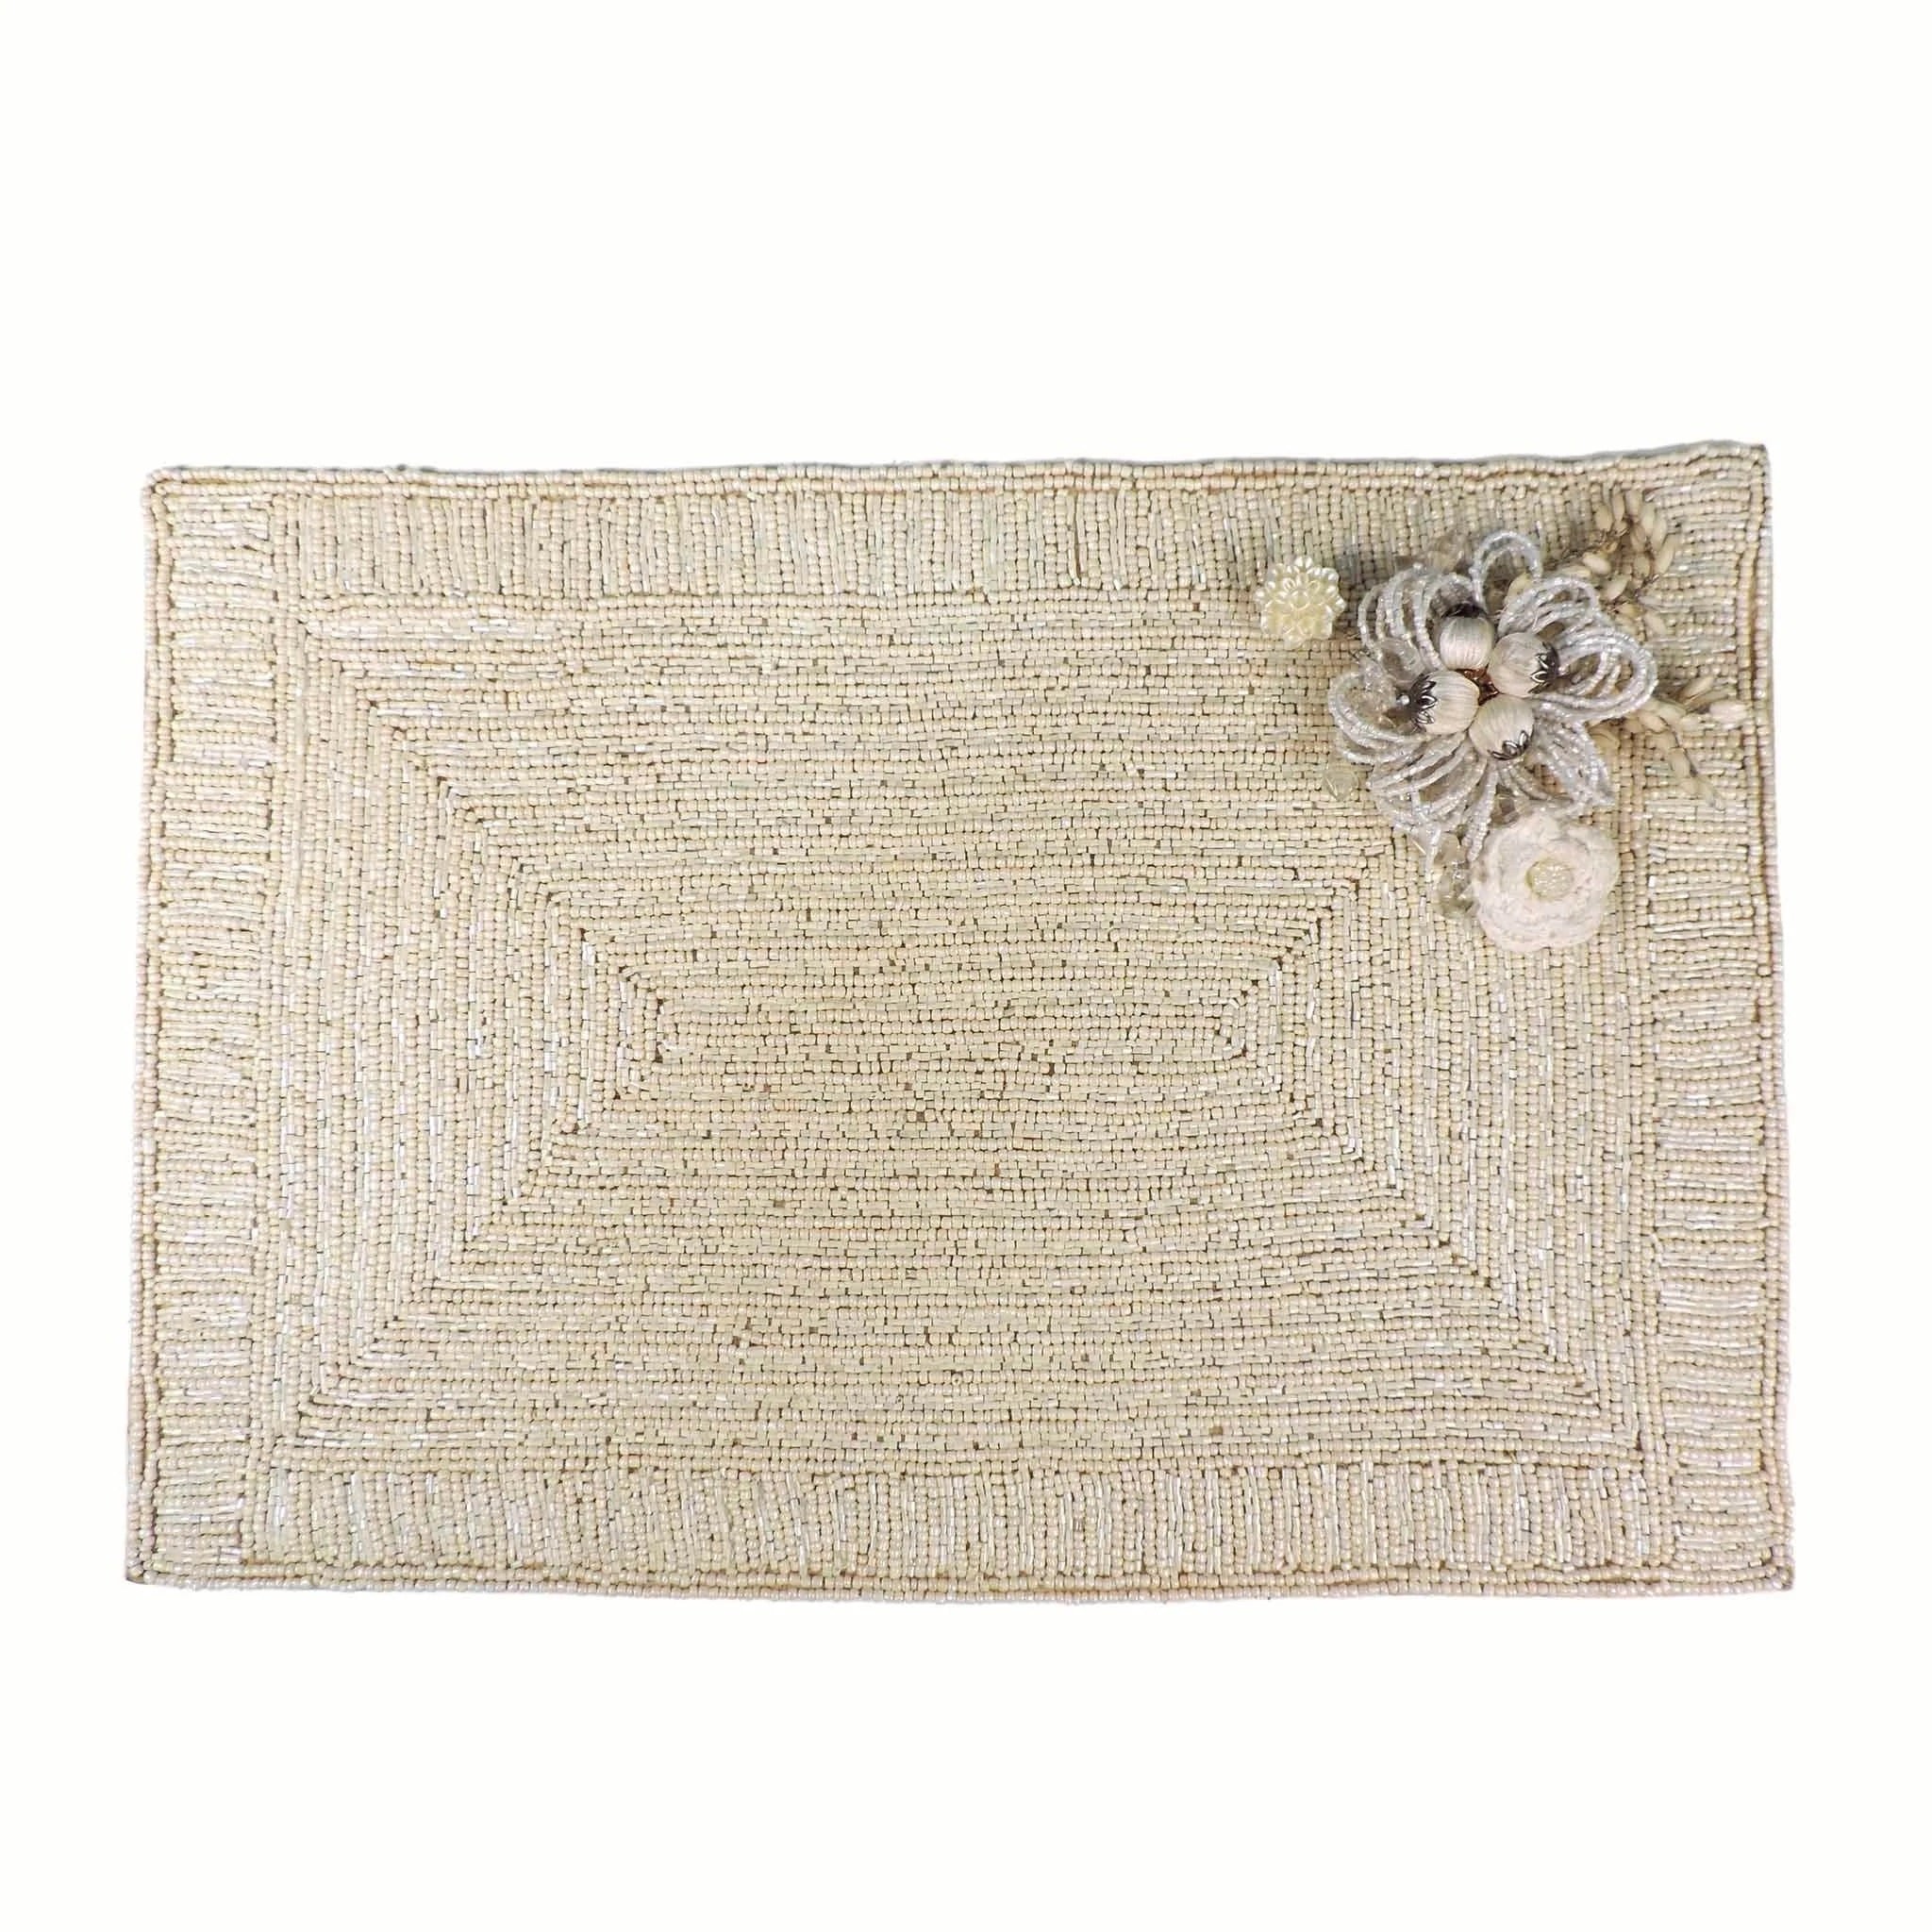 Glass Bead Embroidered Flower Placemat in Off-White, Set of 2/4